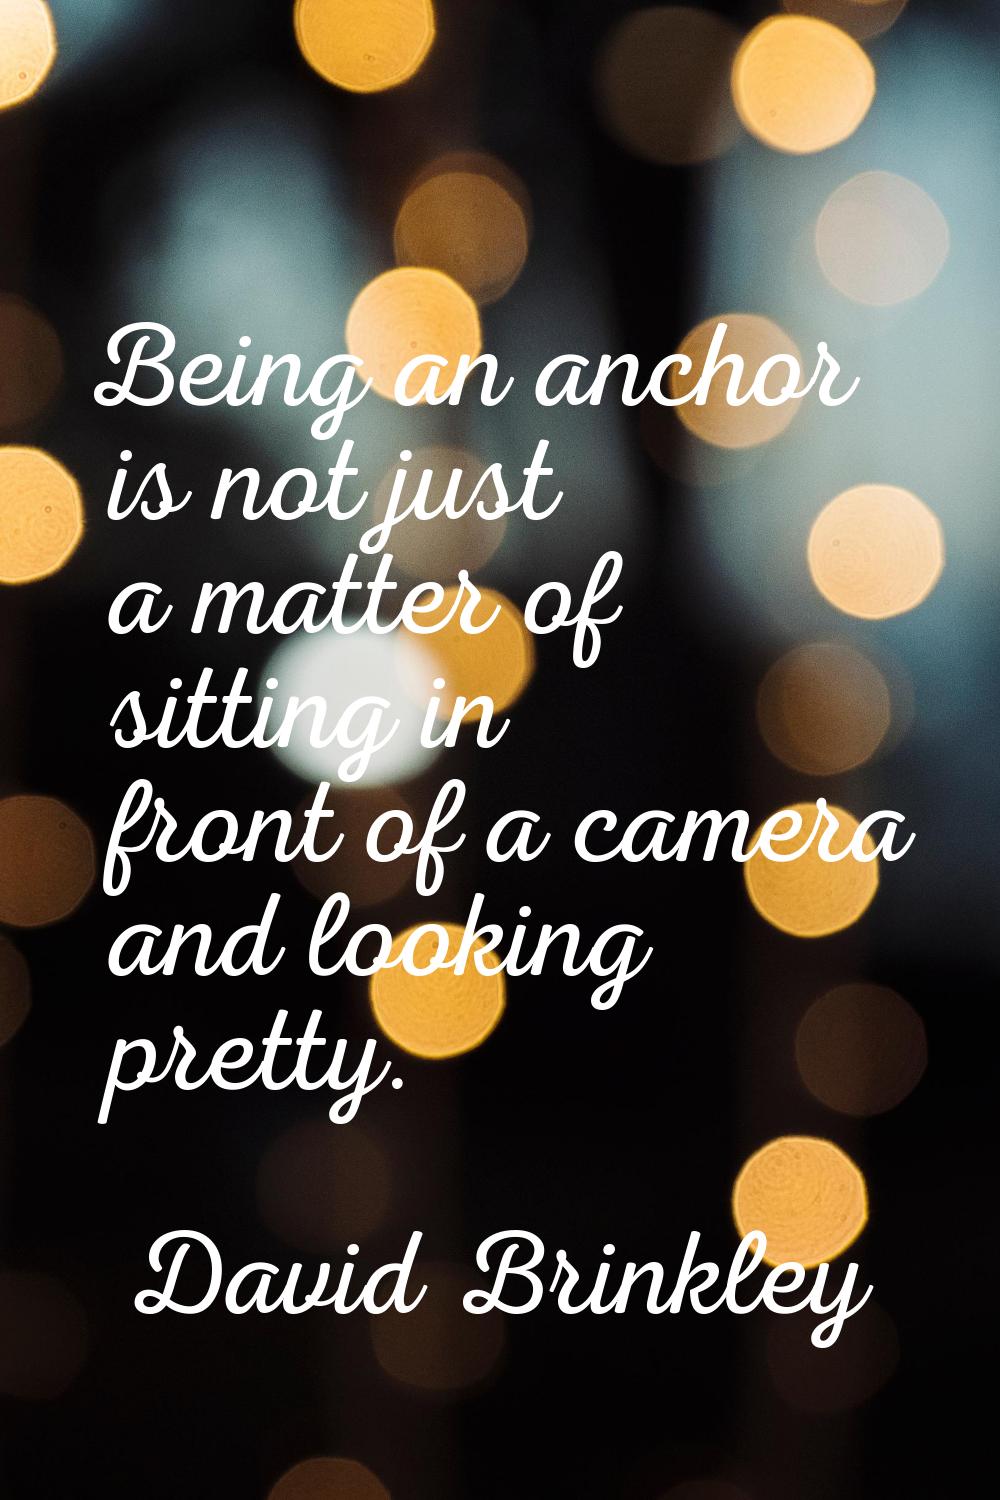 Being an anchor is not just a matter of sitting in front of a camera and looking pretty.